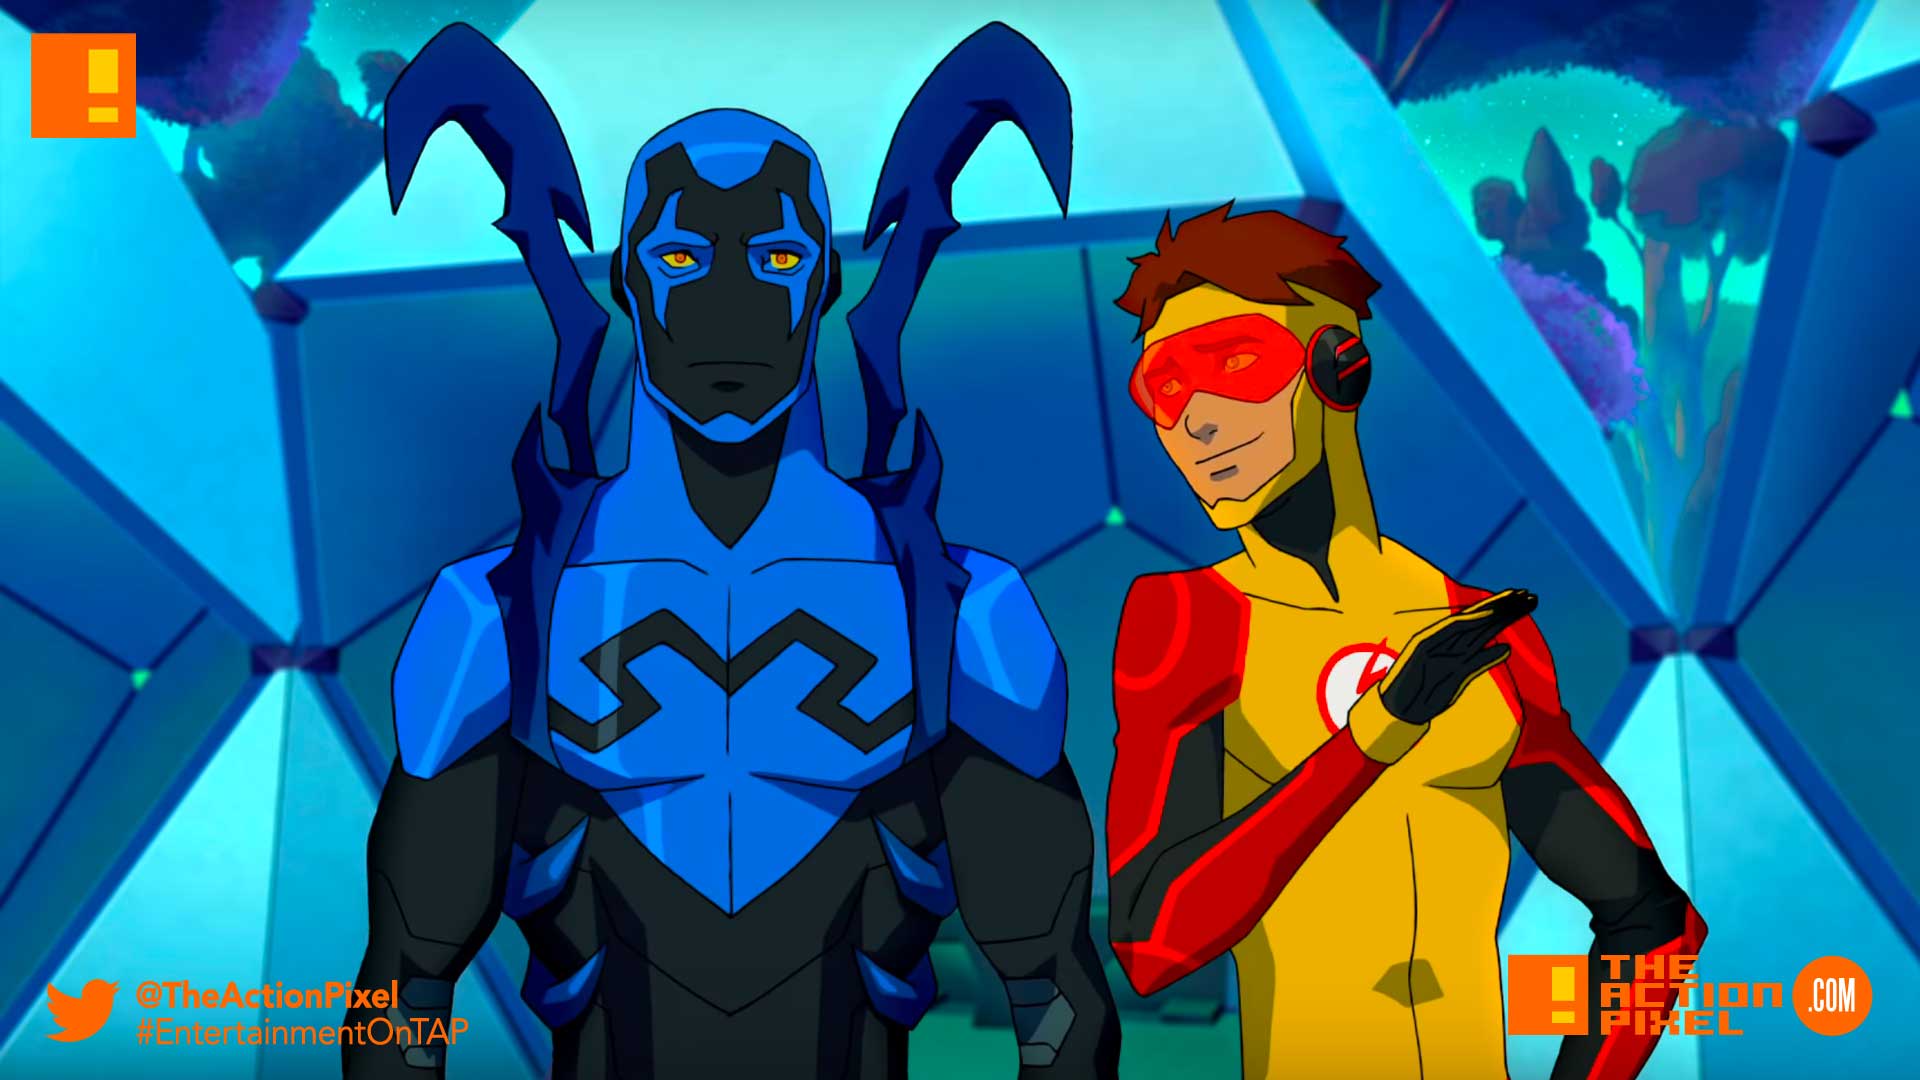 young justice: outsiders, young justice, outsiders, young justice season 3, young justice series, robin, the action pixel, entertainment on tap, dc universe, dc streaming service, streaming